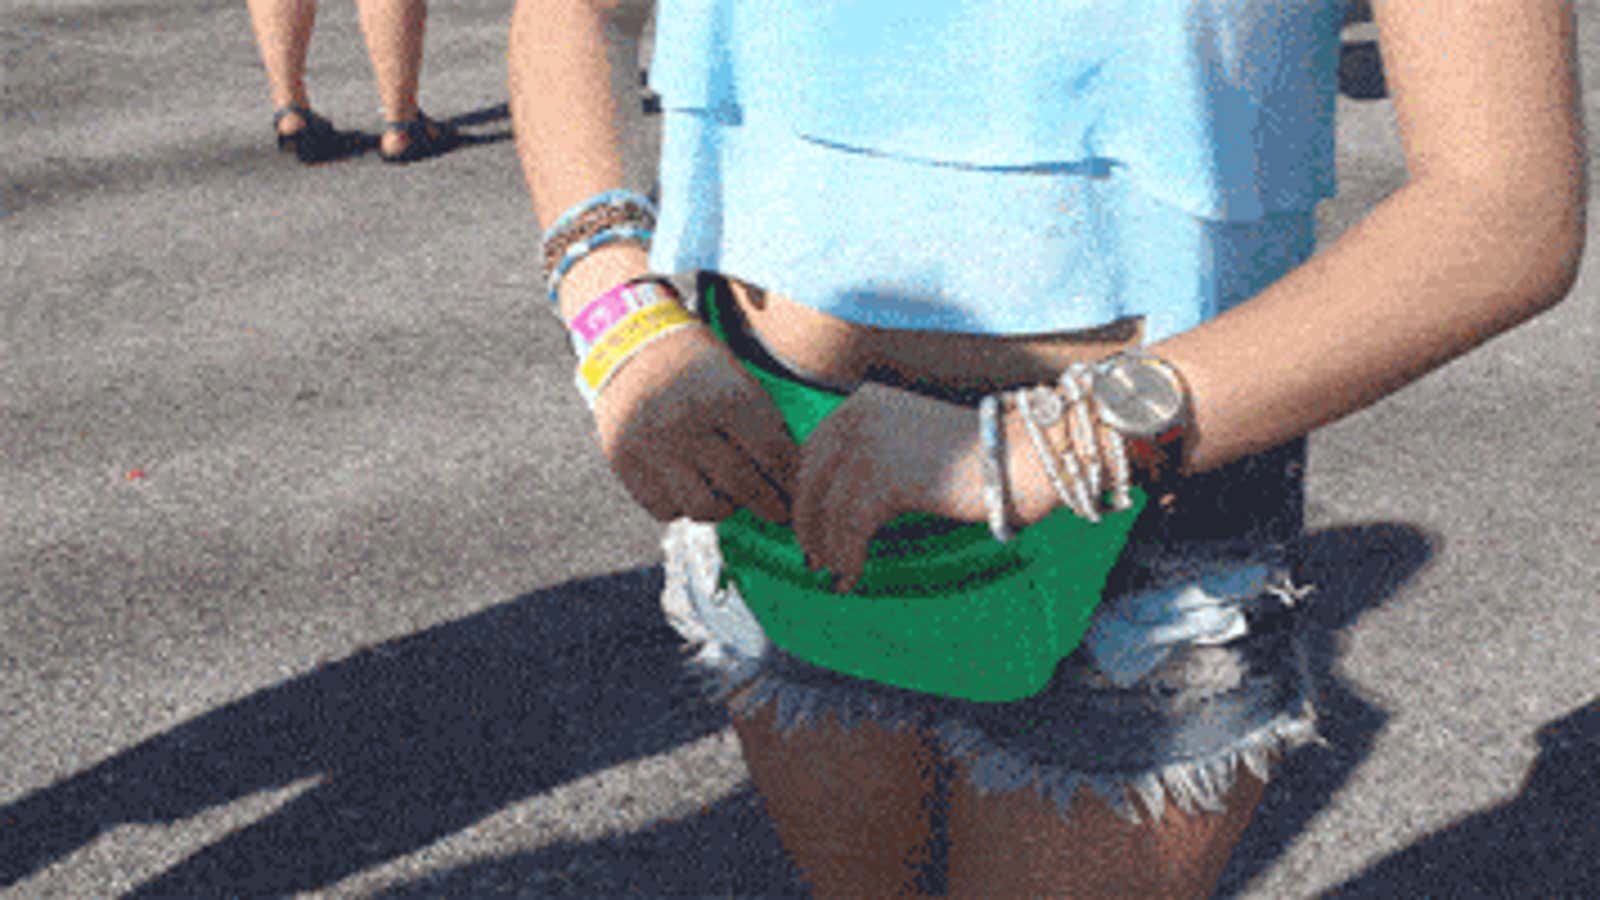 The fanny pack